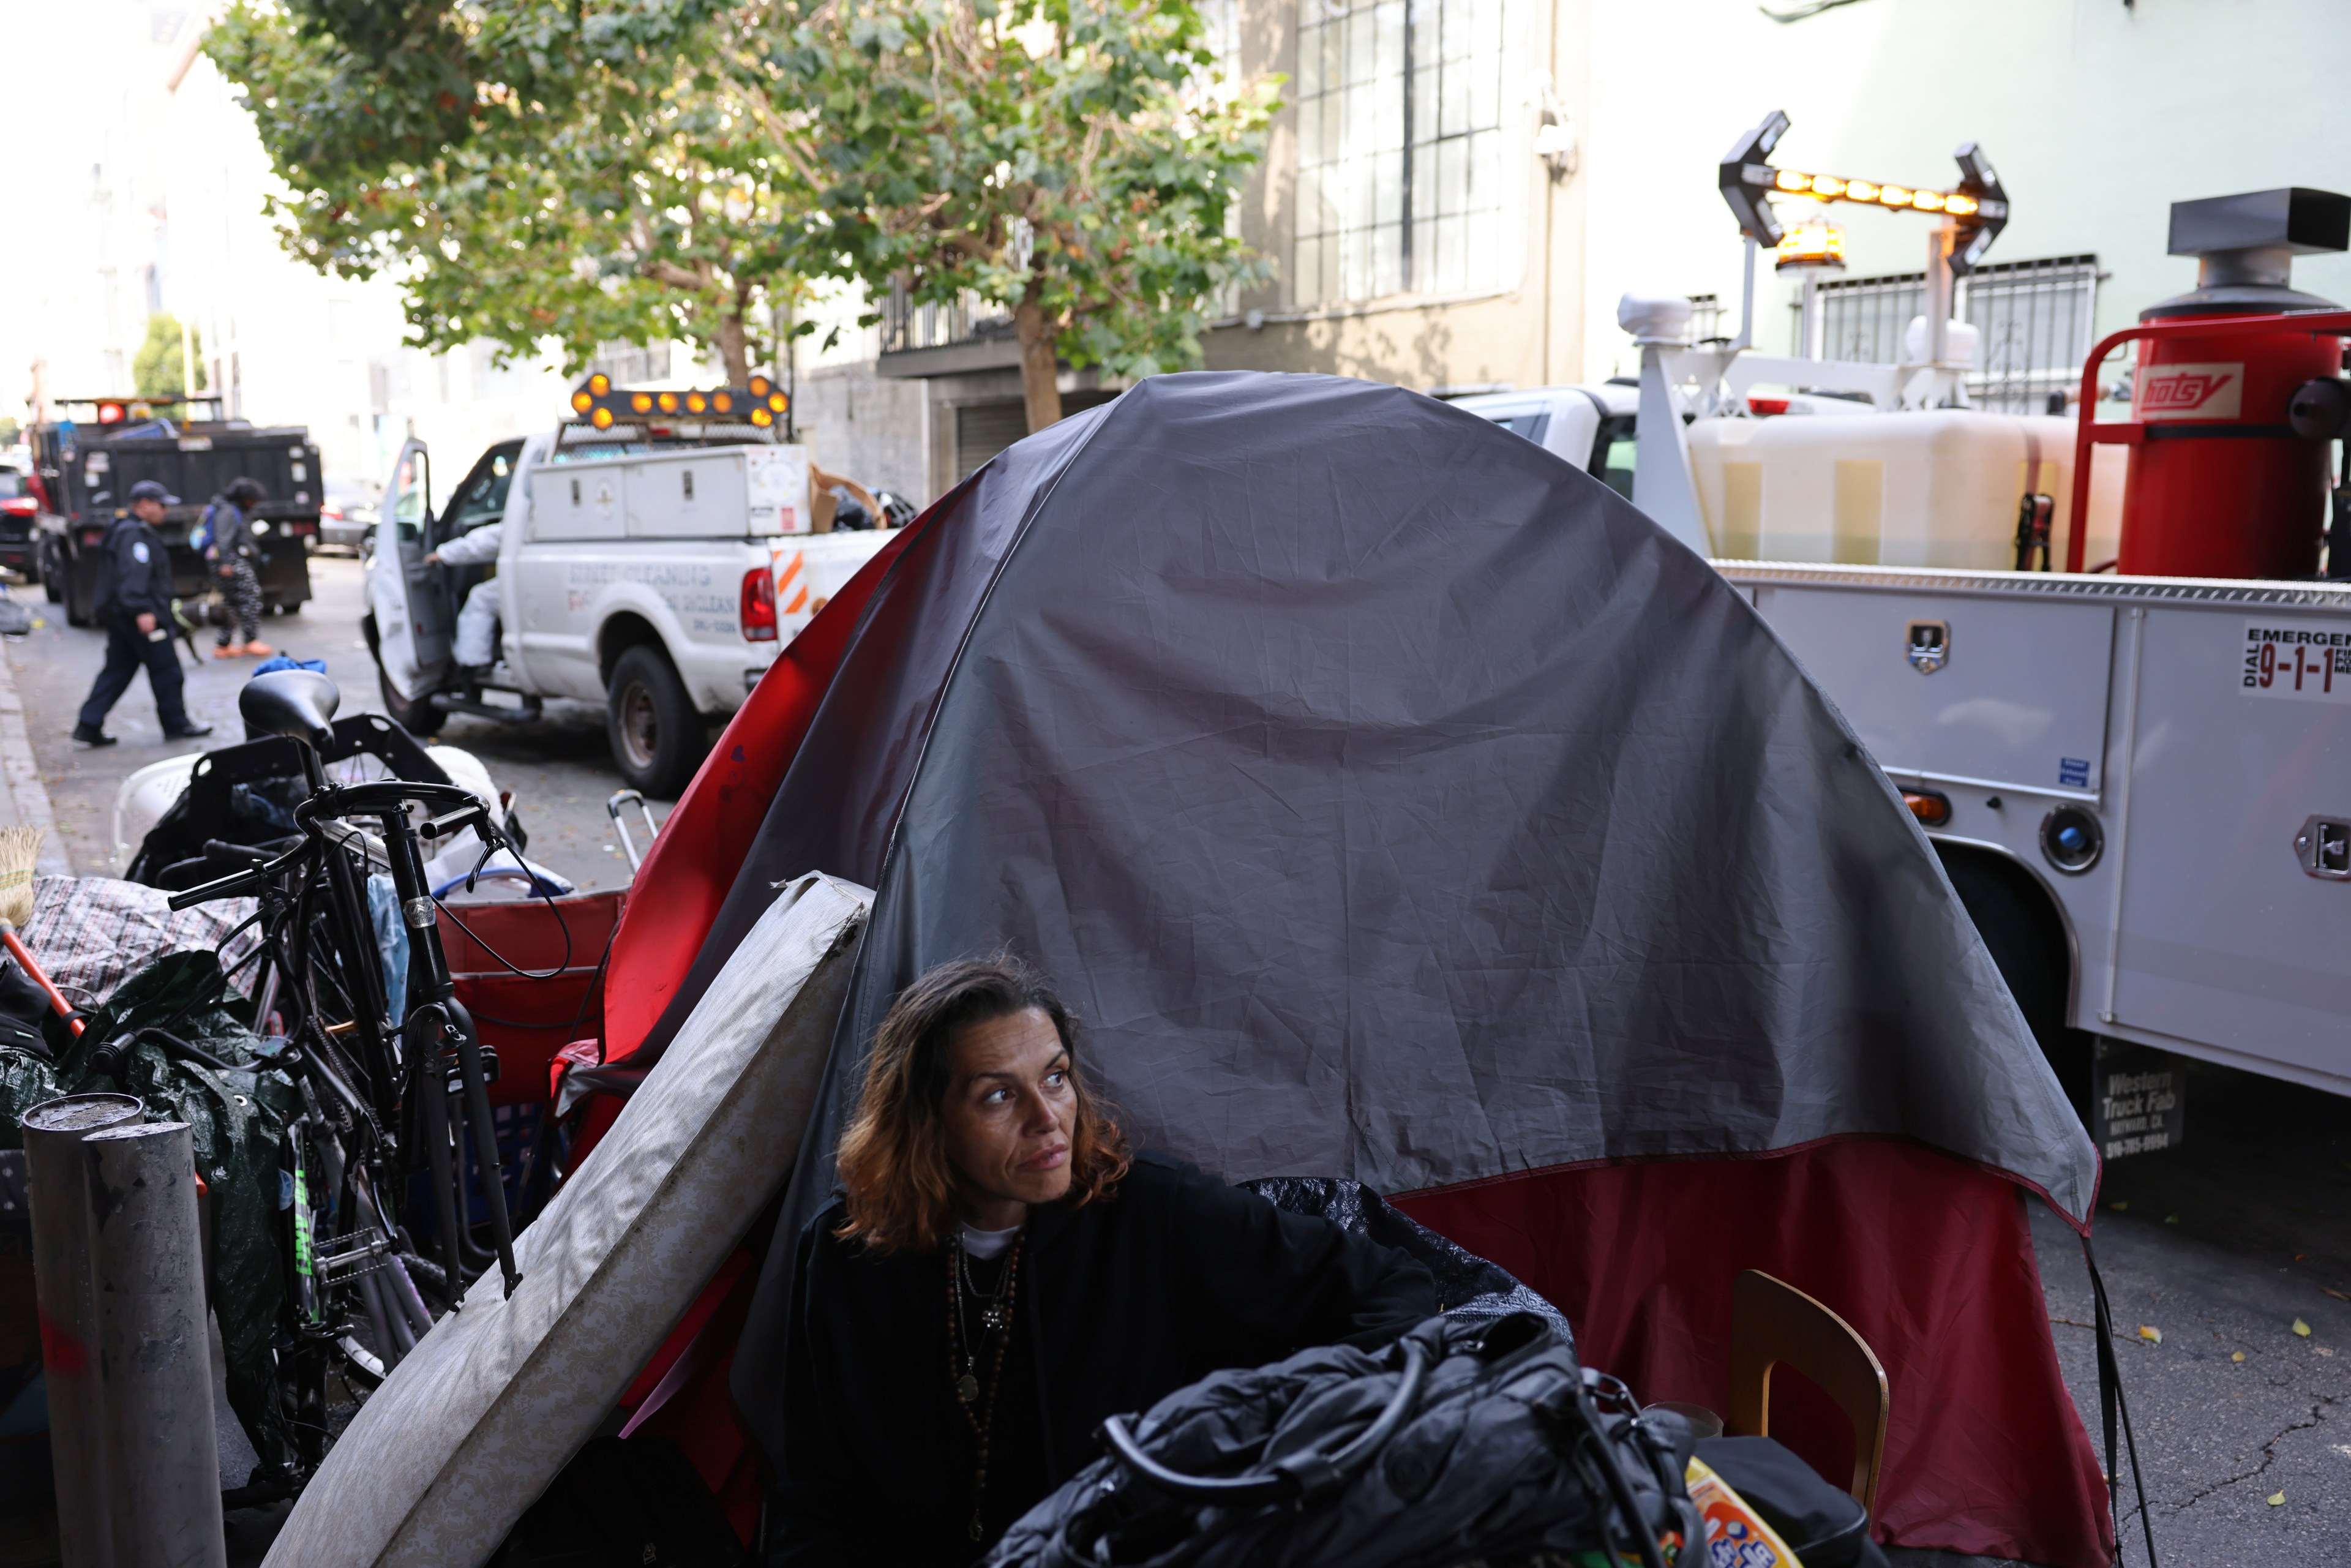 More San Francisco Homeless People Are Entering Shelters, but Encampments Are on the Rise